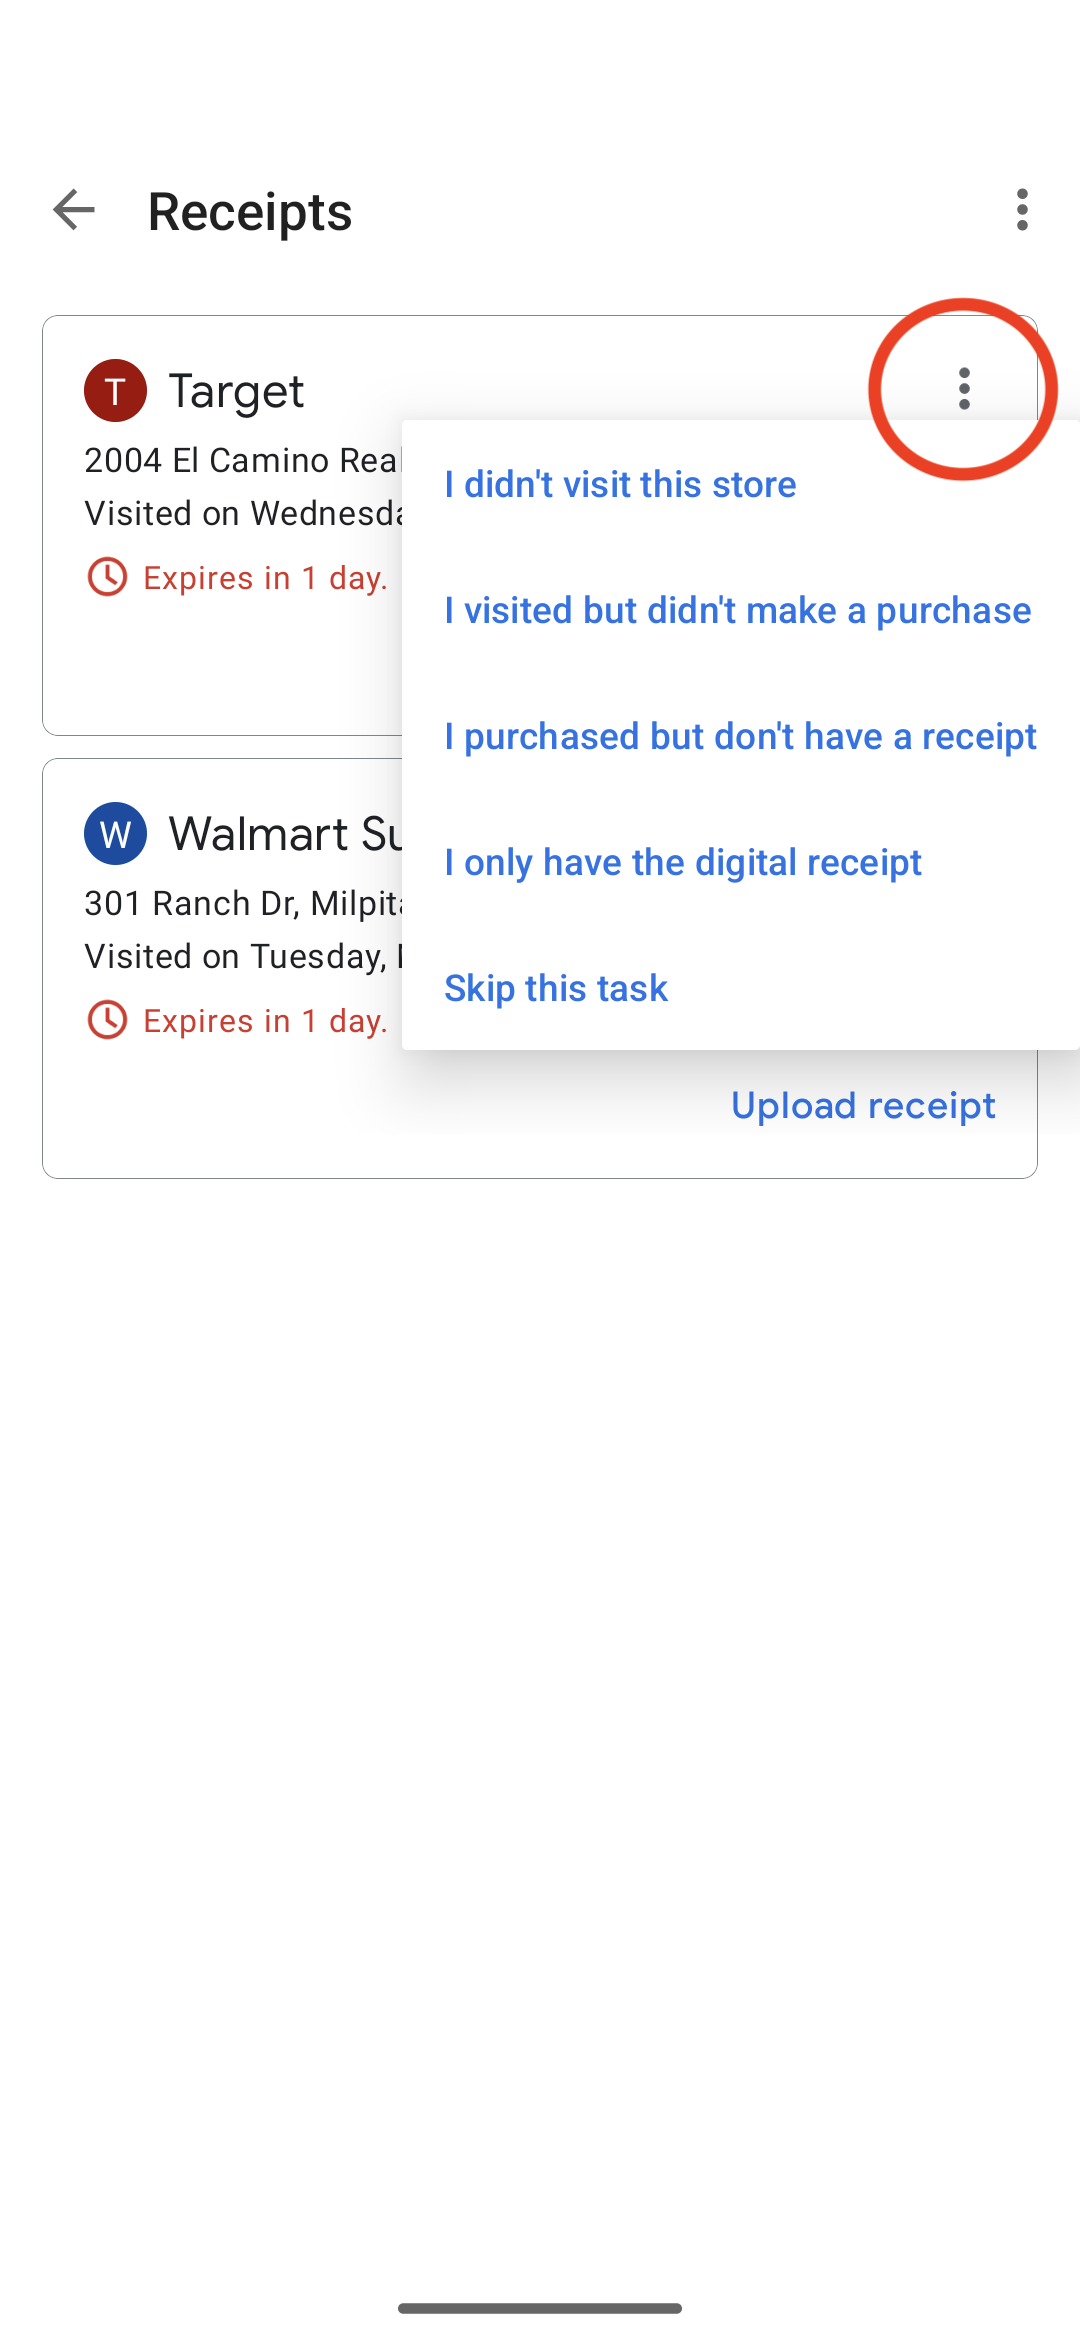 Opinion Rewards: Responding to a receipt task when you don’t have a receipt.